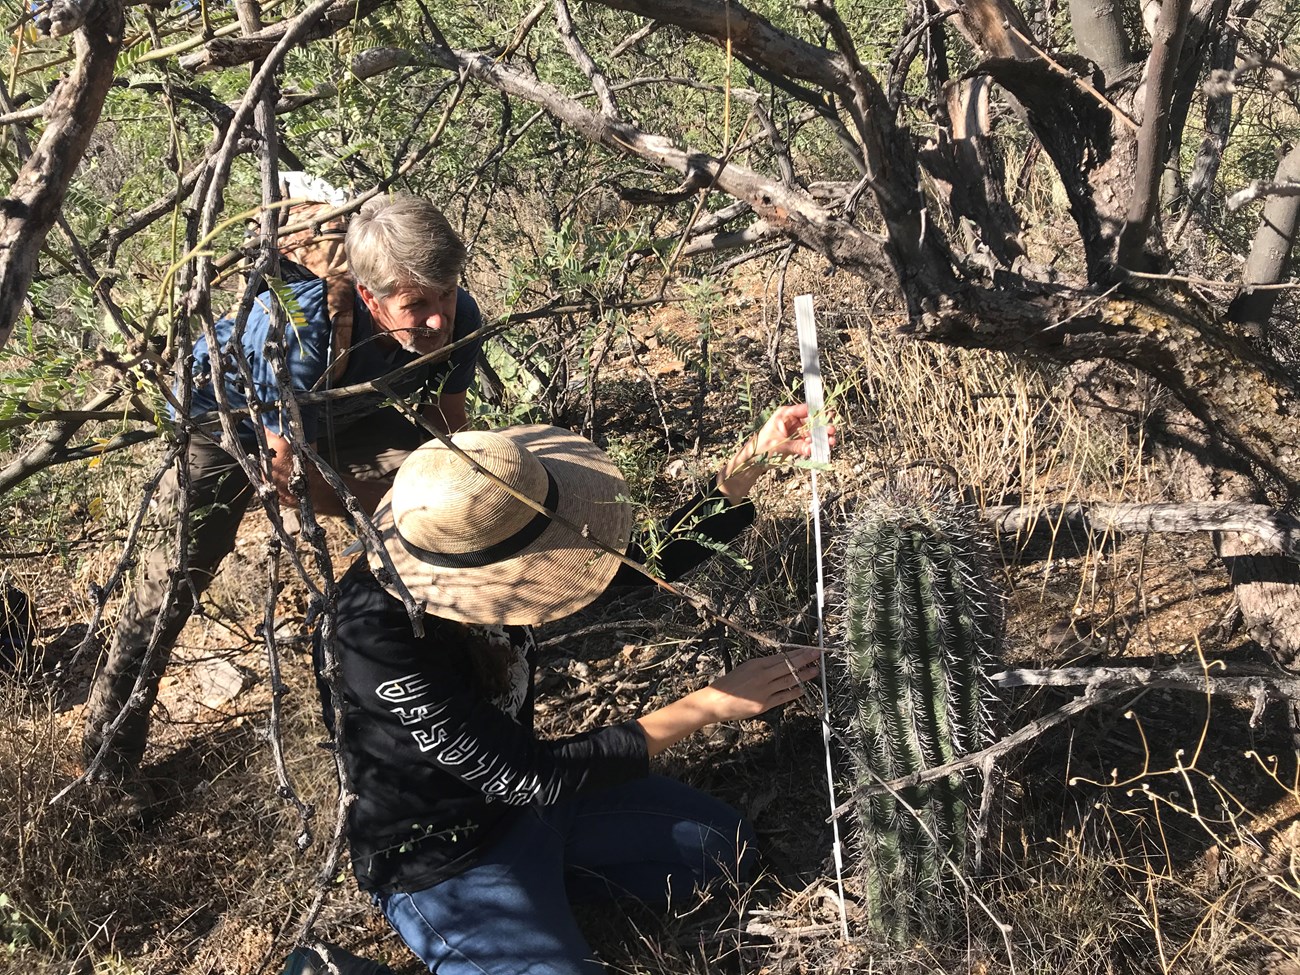 Two volunteers measuring the height of a short saguaro next to its nurse tree using a meter stick